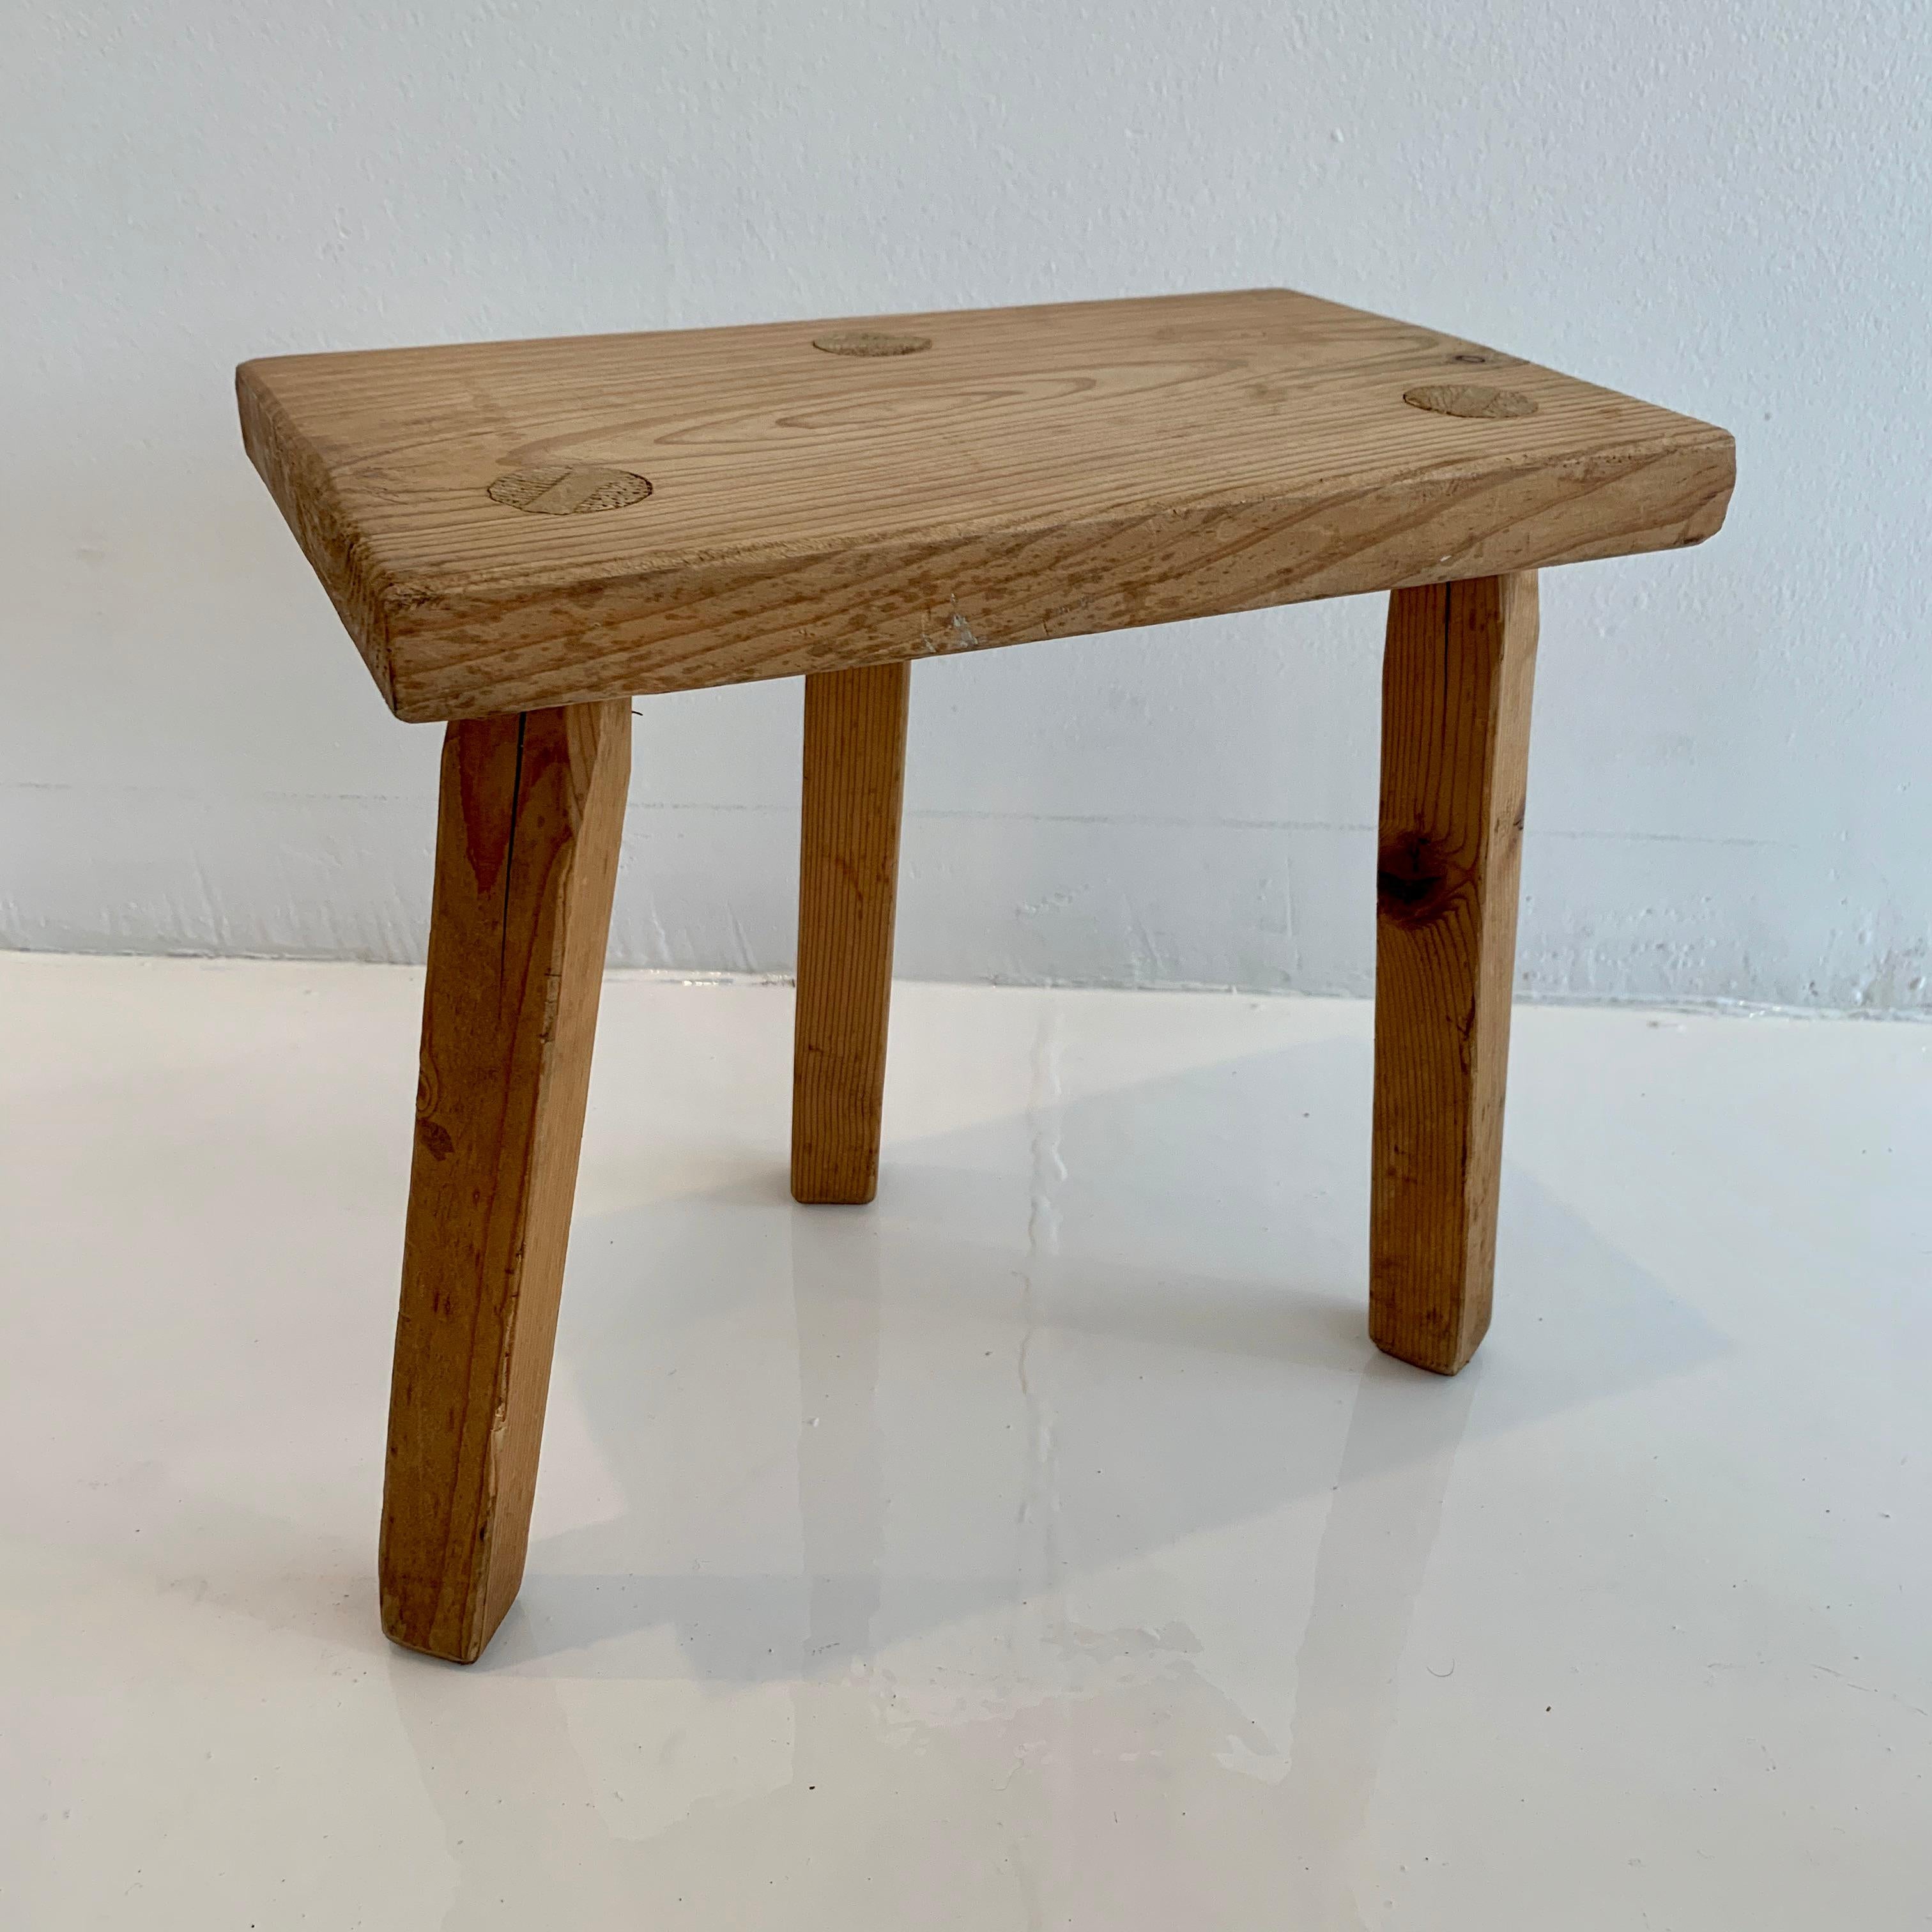 Vintage wooden milking stool made in France, circa 1950s. Thick seat with tripod legs. No nails or hardware. Great lines and shape. Rustic petite stool with a ton of presence. 
 